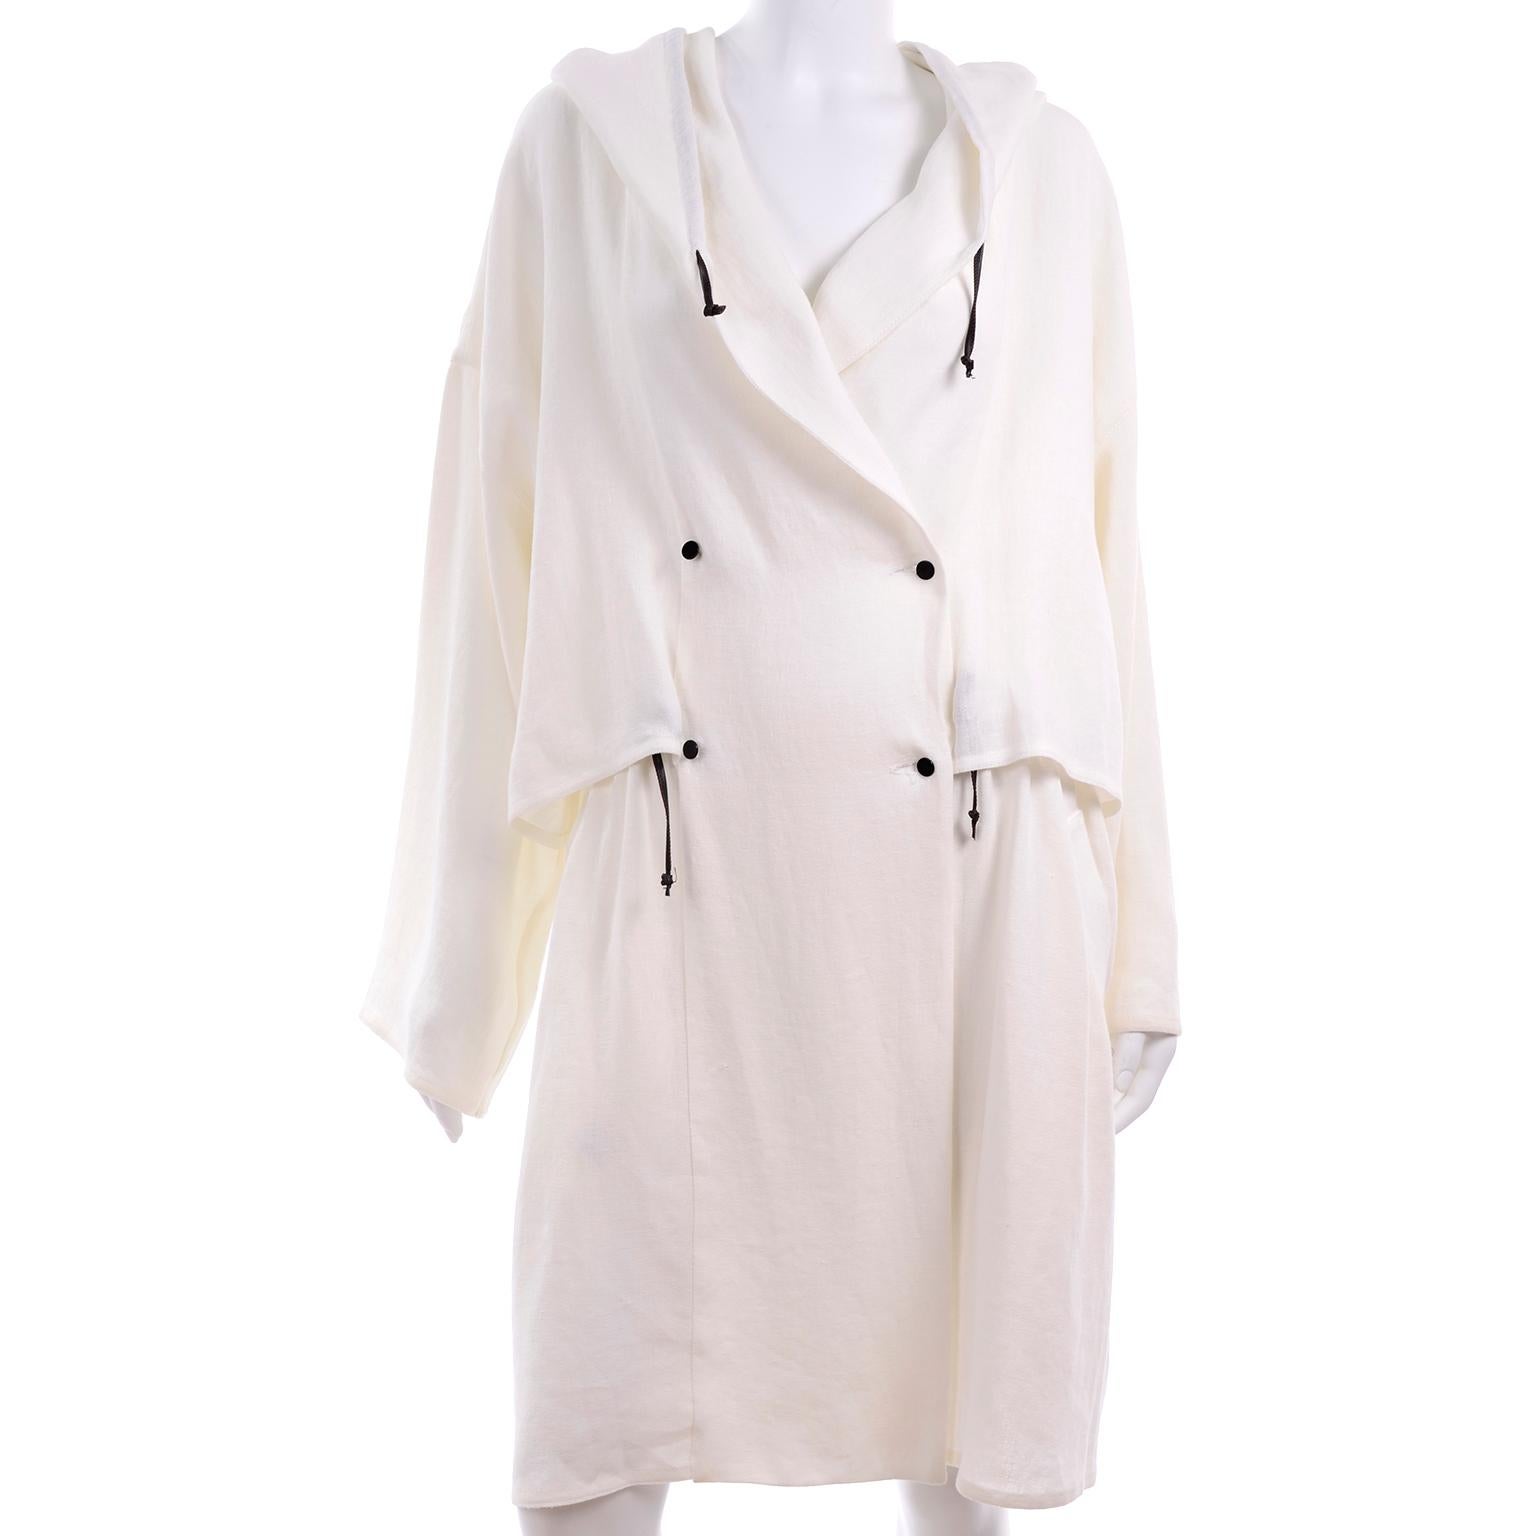 Deadstock New White Linen Dusan Coat Drawstring Jacket with Hood New With Tags 8